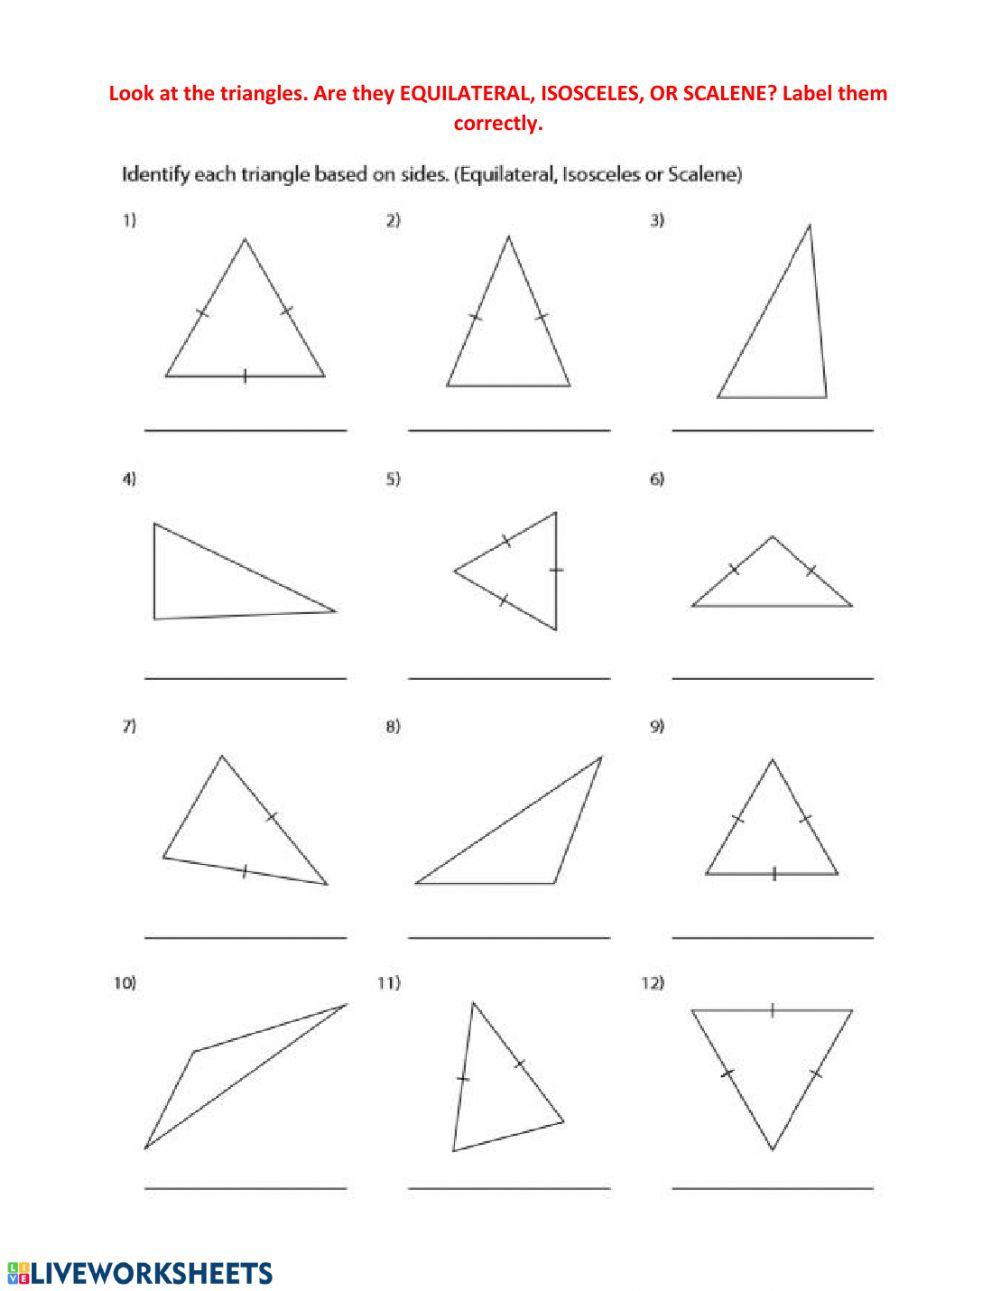 Isosceles, Equilateral, and Scalene Triangles